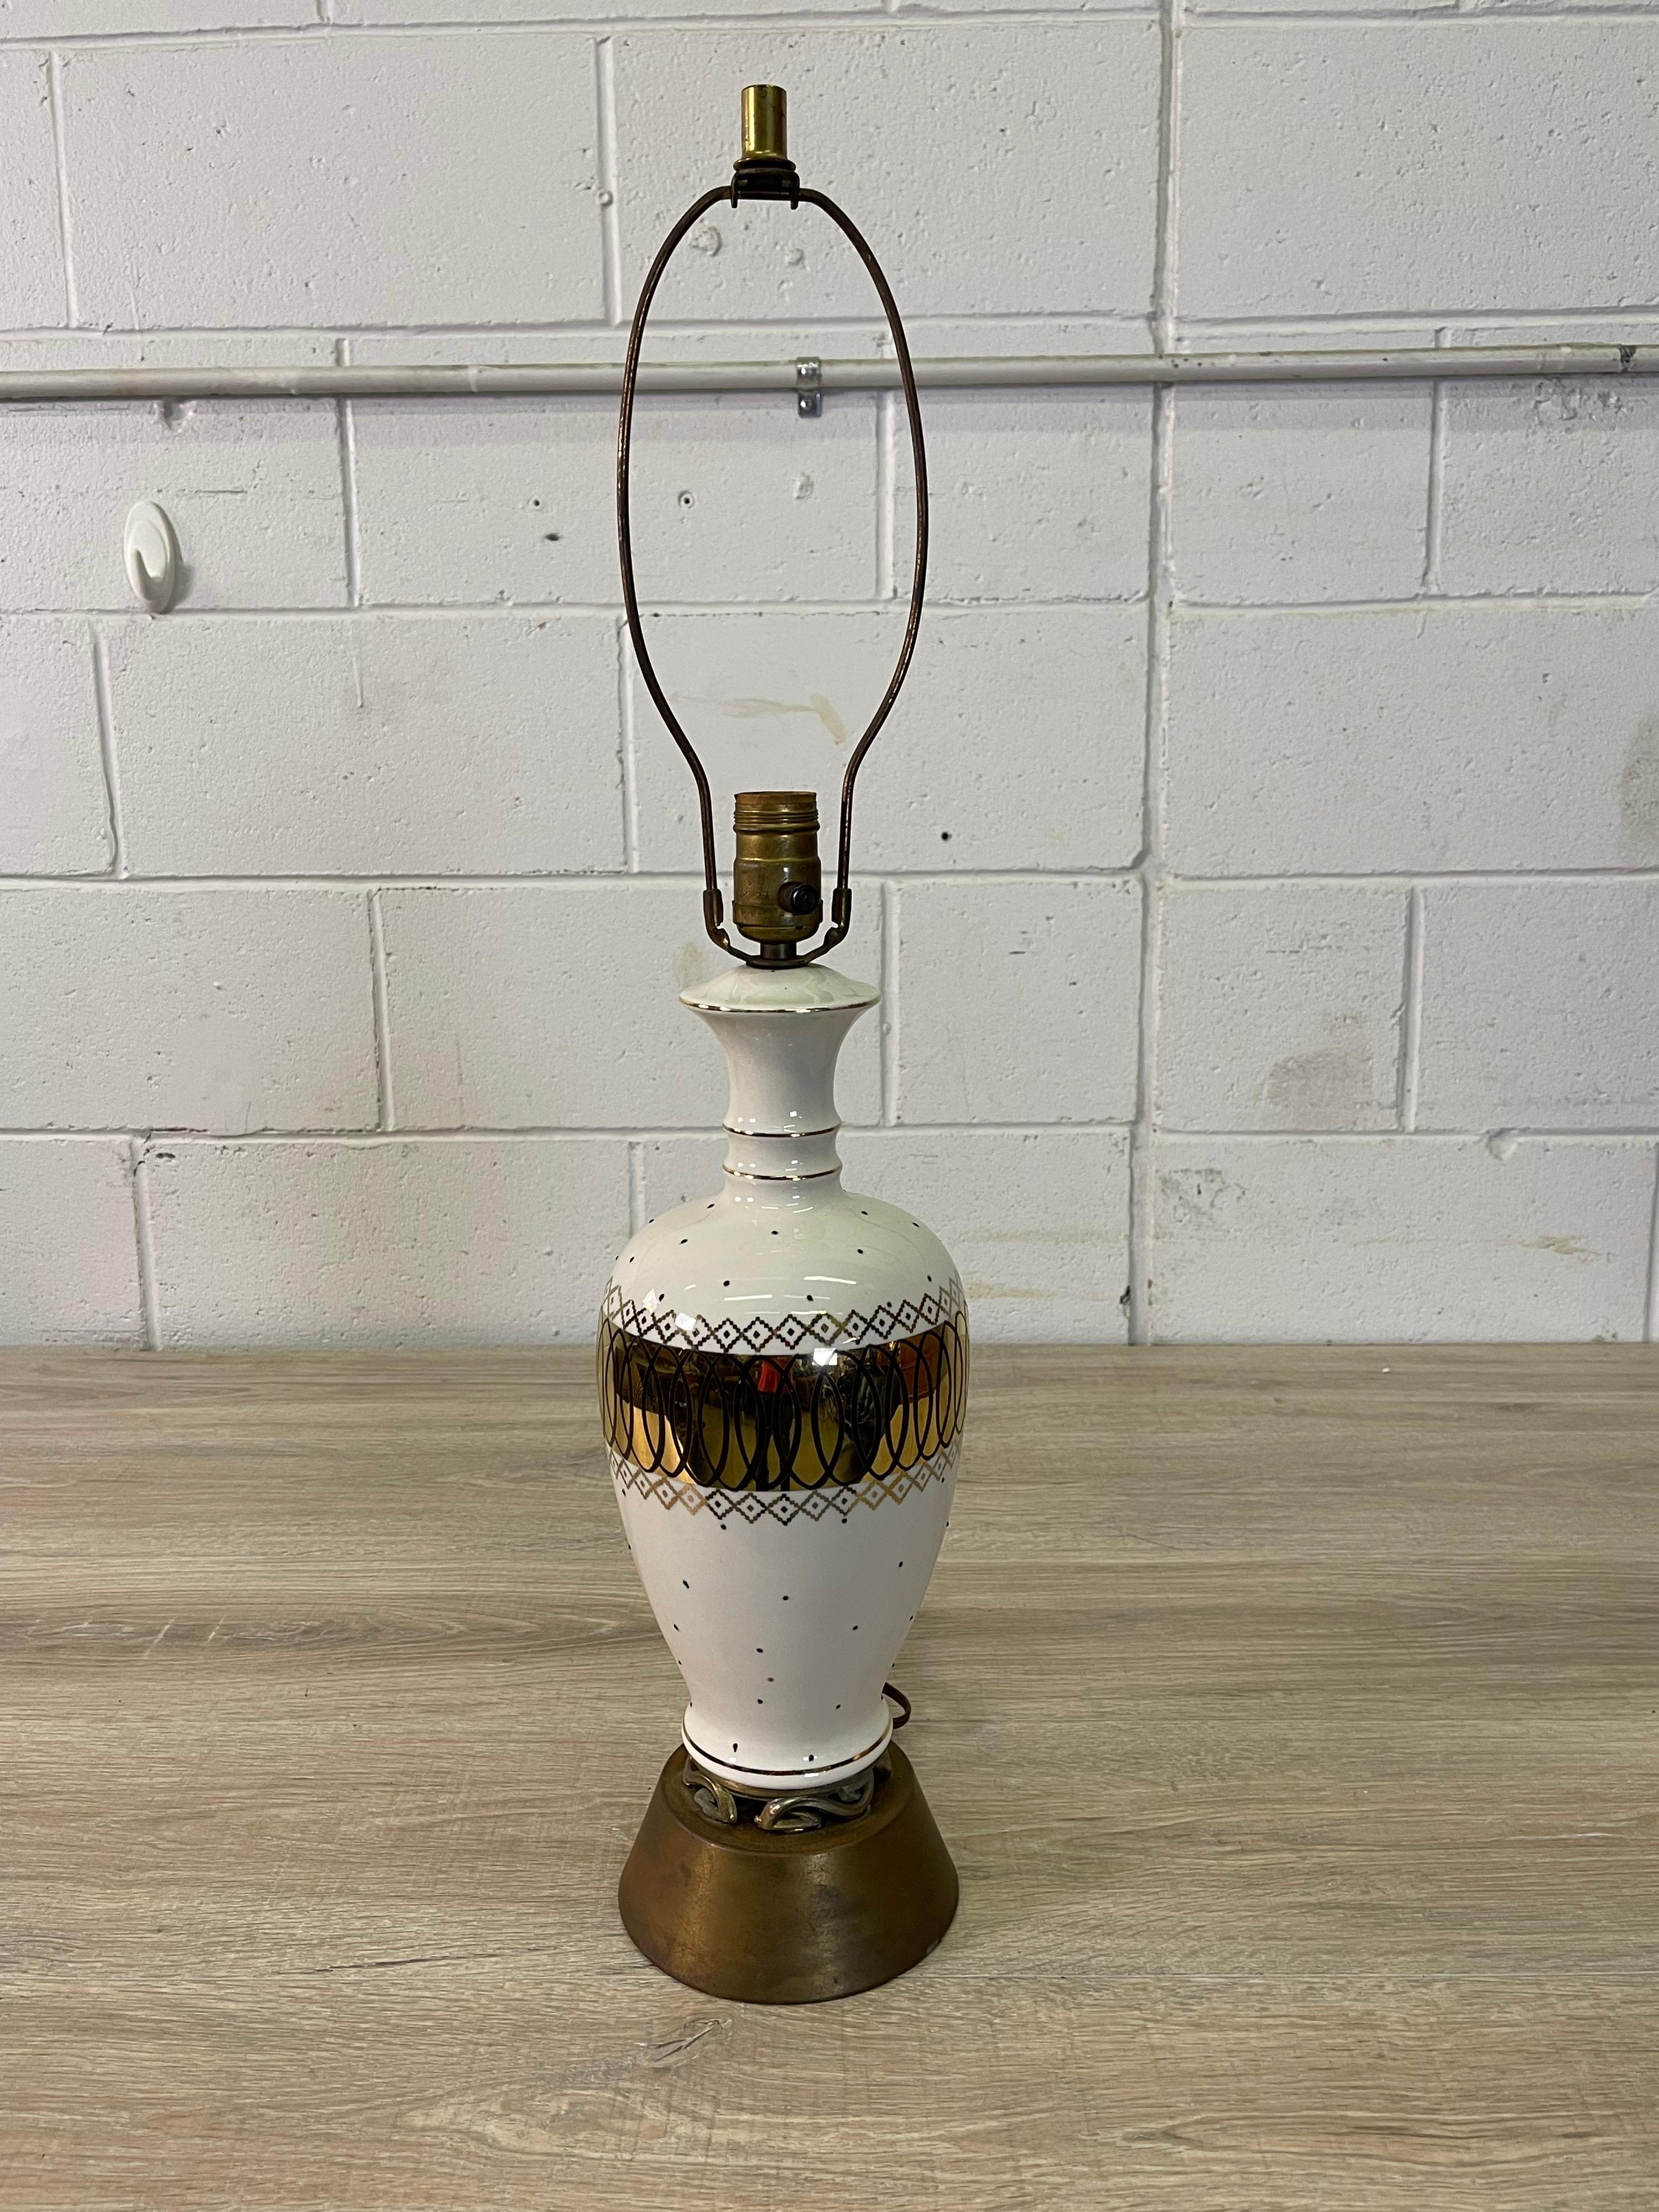 Vintage 1950s atomic style table lamp. The lamp is a cream colored ceramic with an atomic black design. There are also black dots on the lamp to accent the design. The lamp has a floral brass base. Wired for the US and in working condition. Harp, 